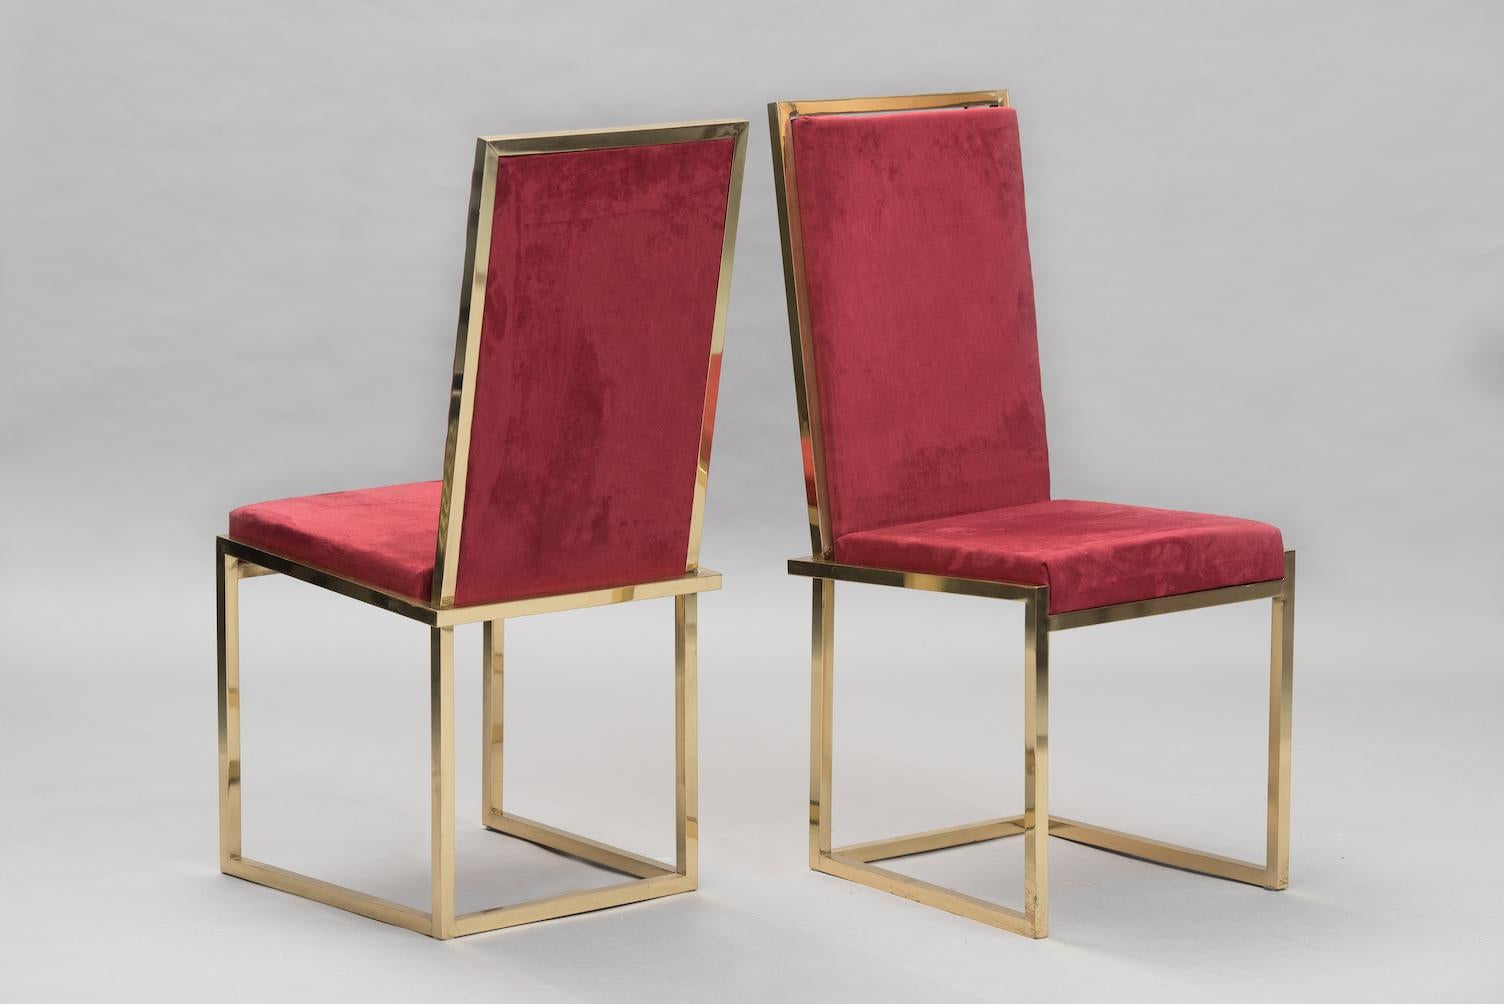 A pair of high back chairs in brass and bordeaux suede.